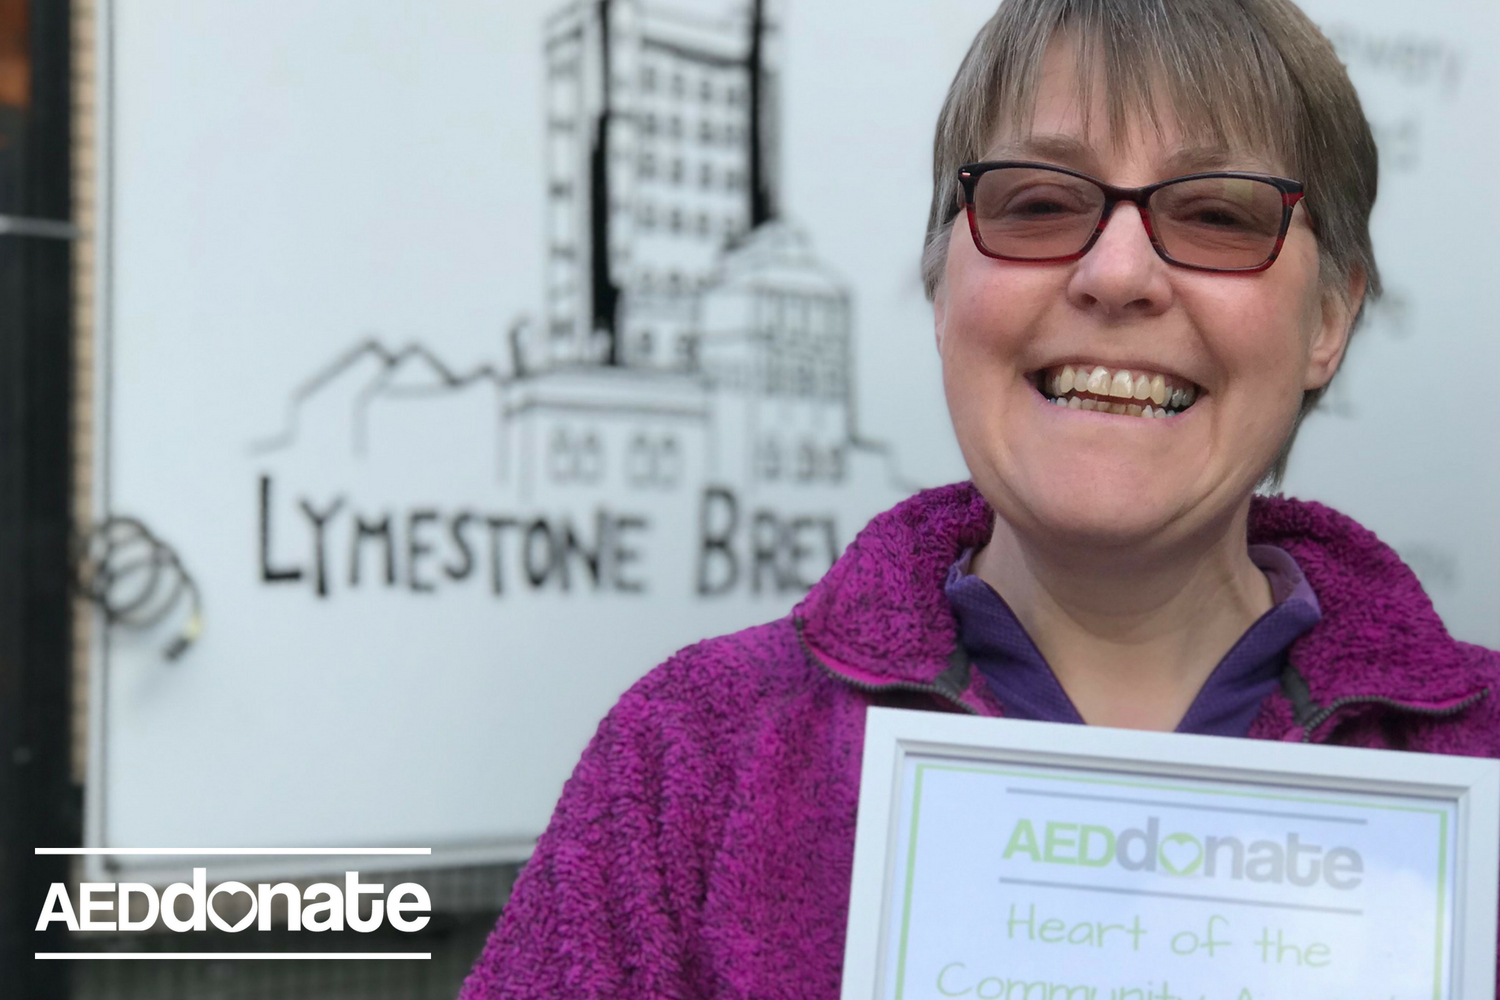 Local Brewery recieves ‘Heart of the Community’ Award